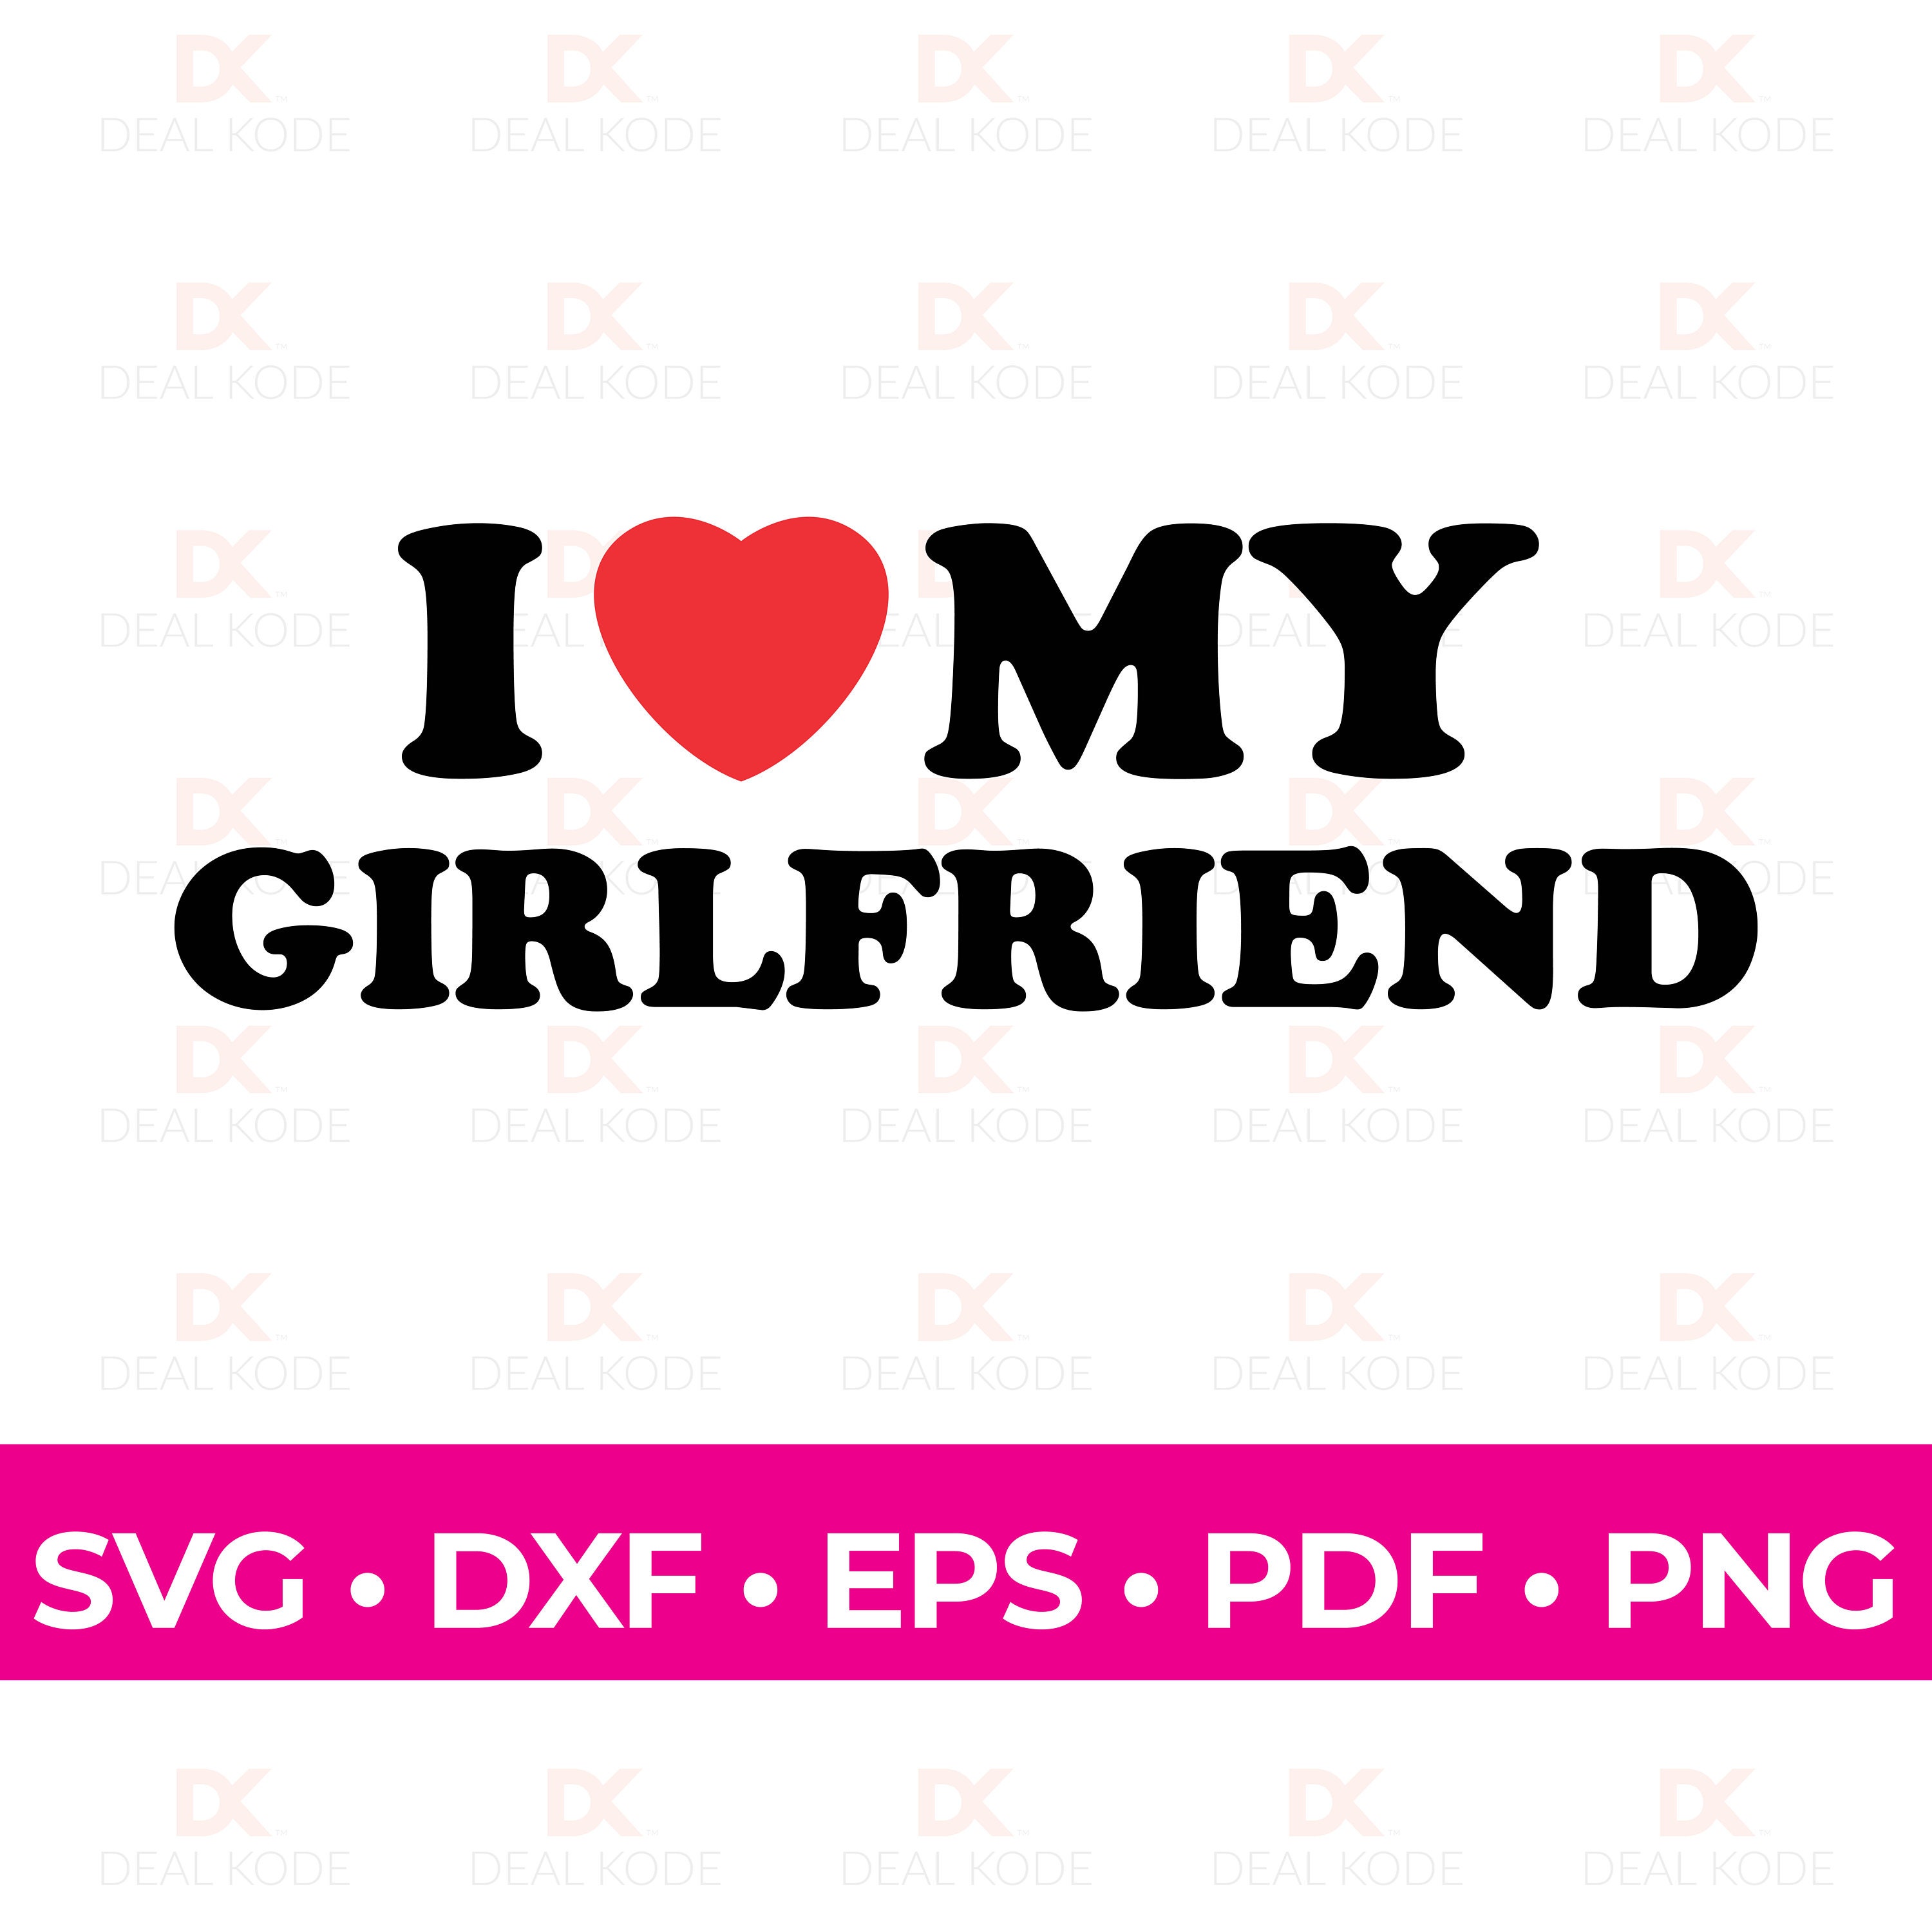 Will You Be My Girlfriend Svg Design Graphic by ijdesignerbd777 · Creative  Fabrica